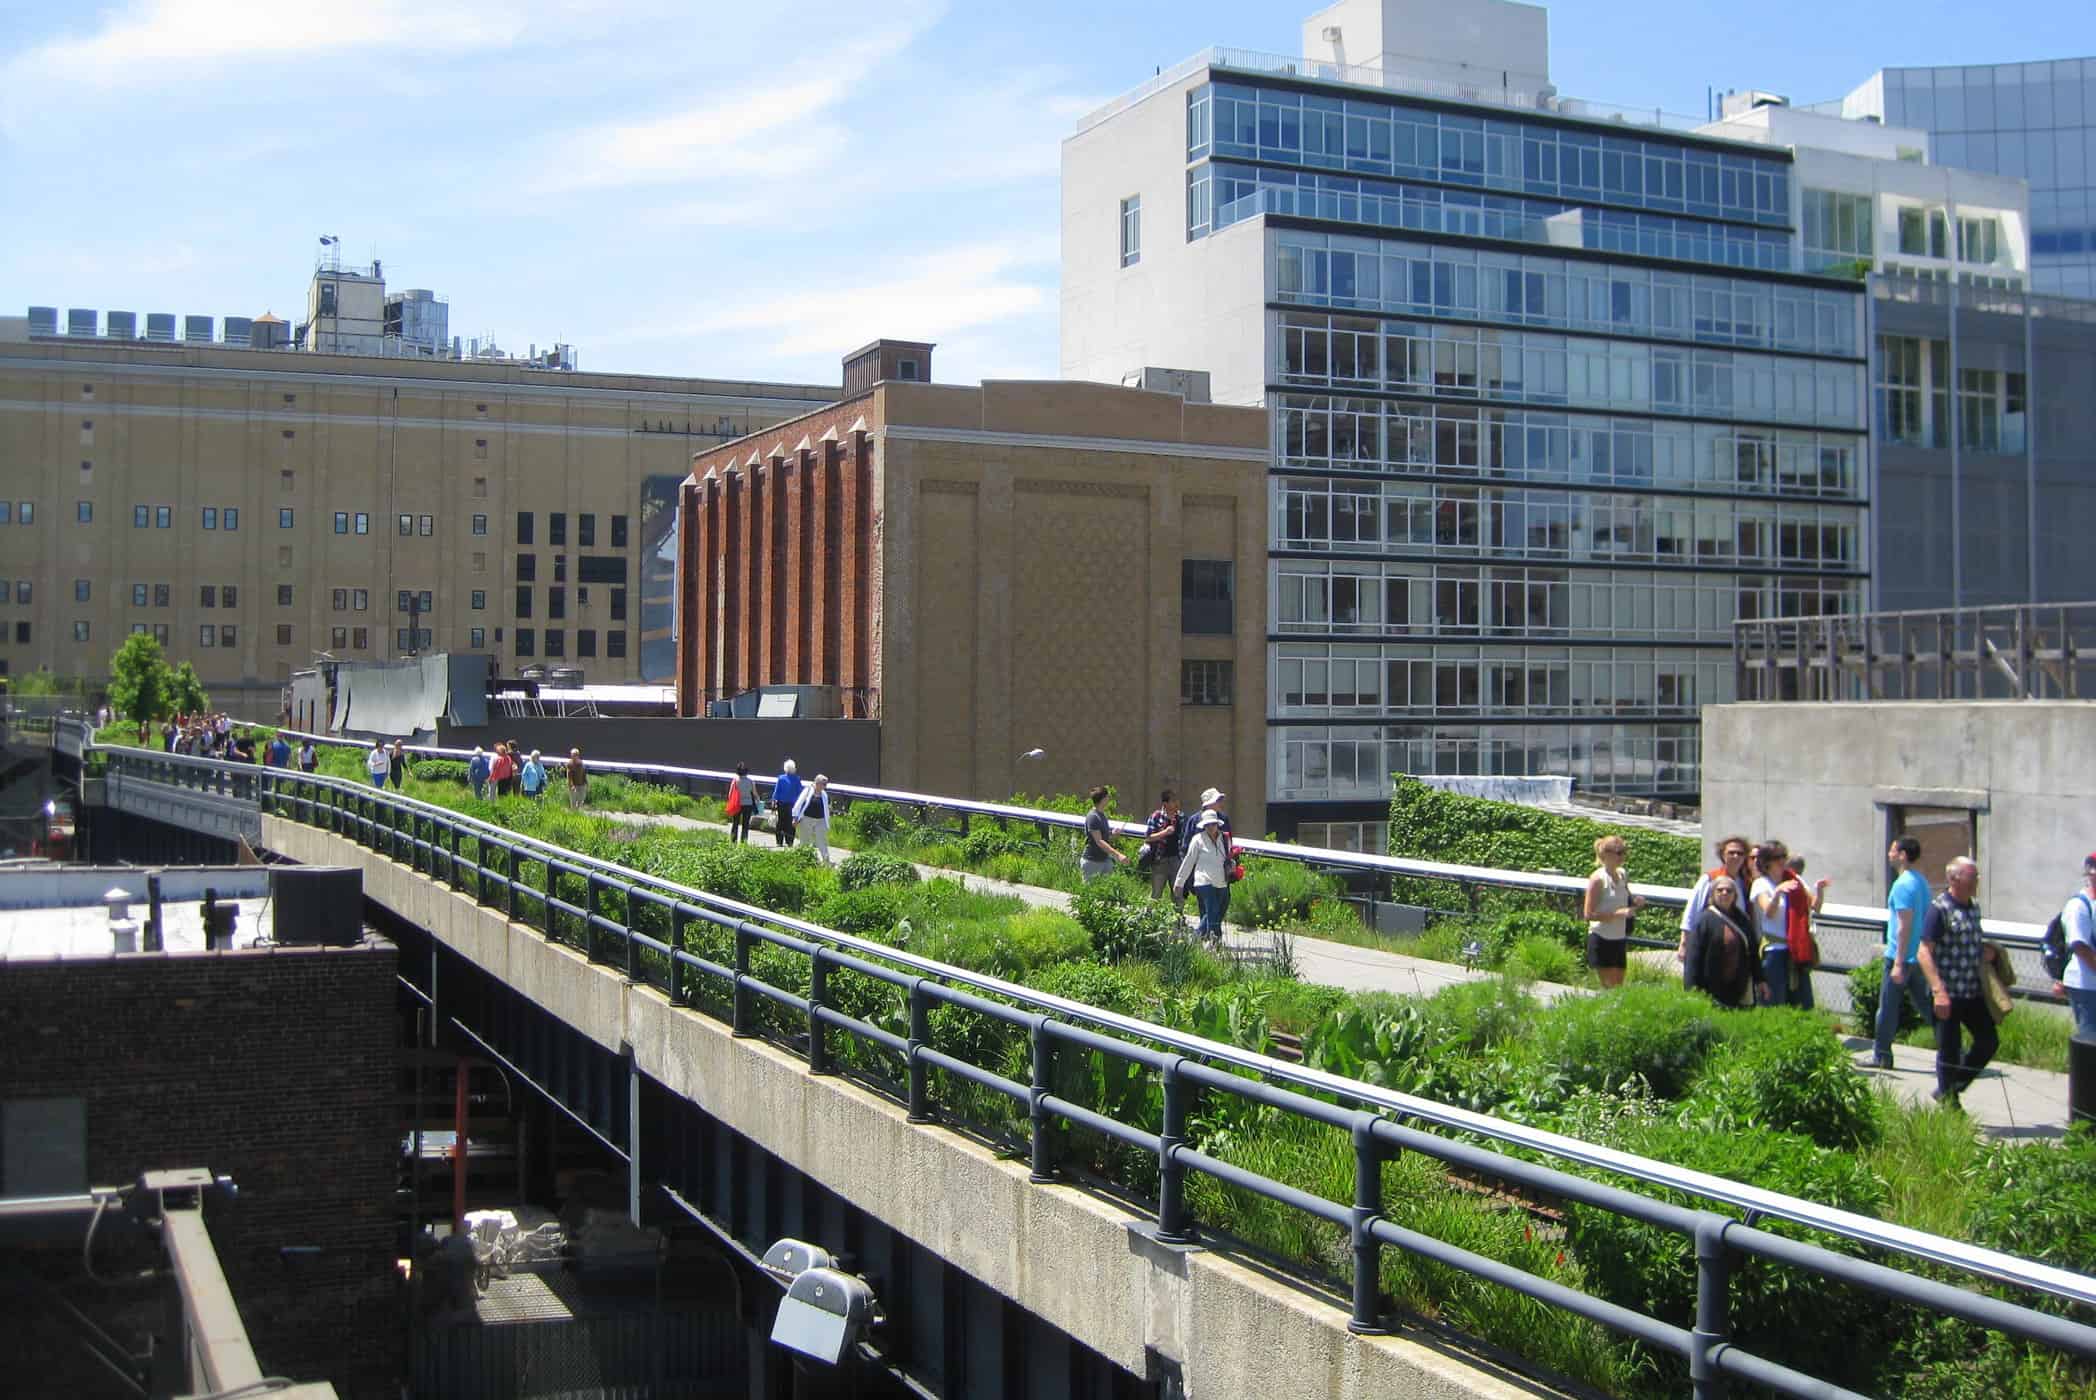 Walking the High Line in New York City